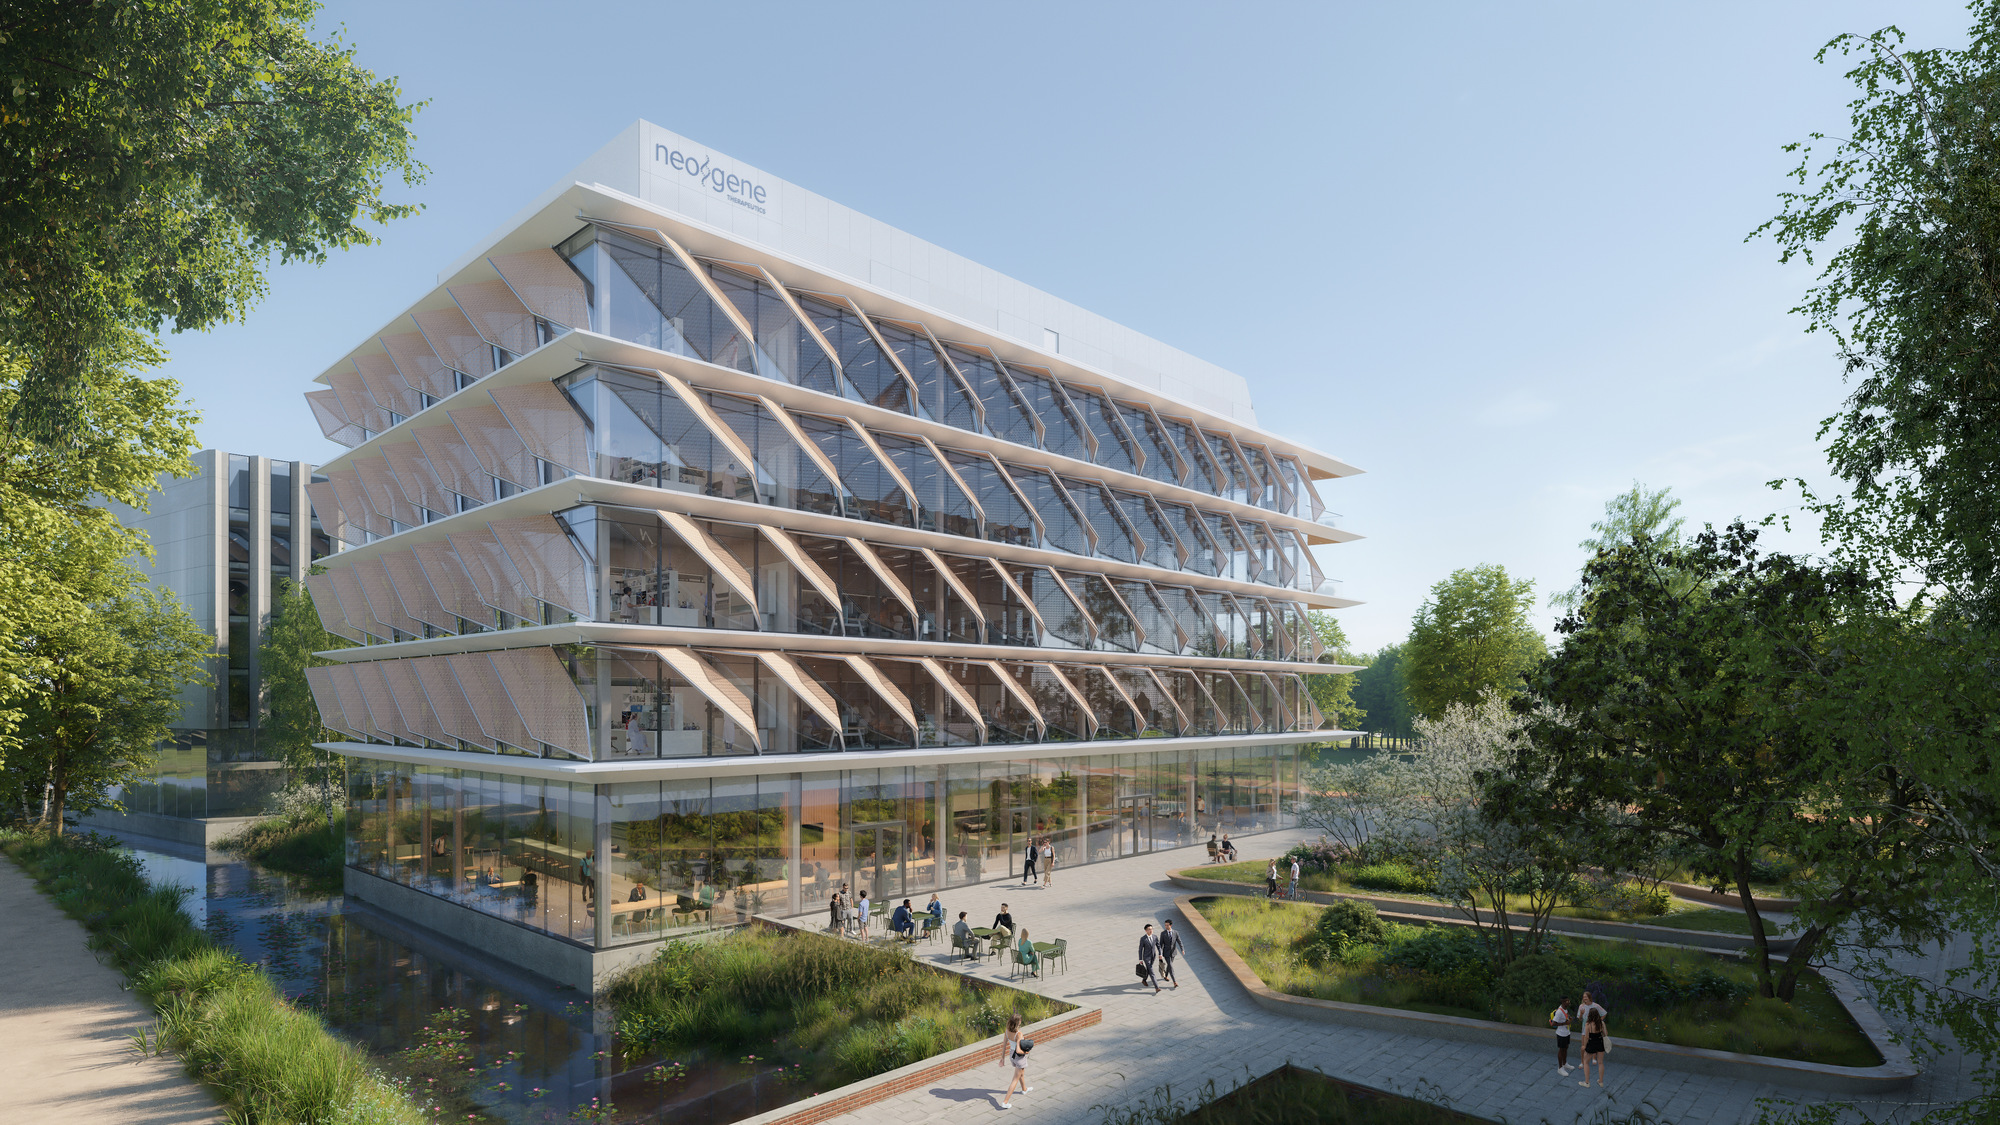 UNStudio Designs One of the Most Sustainable Laboratory Buildings in the World